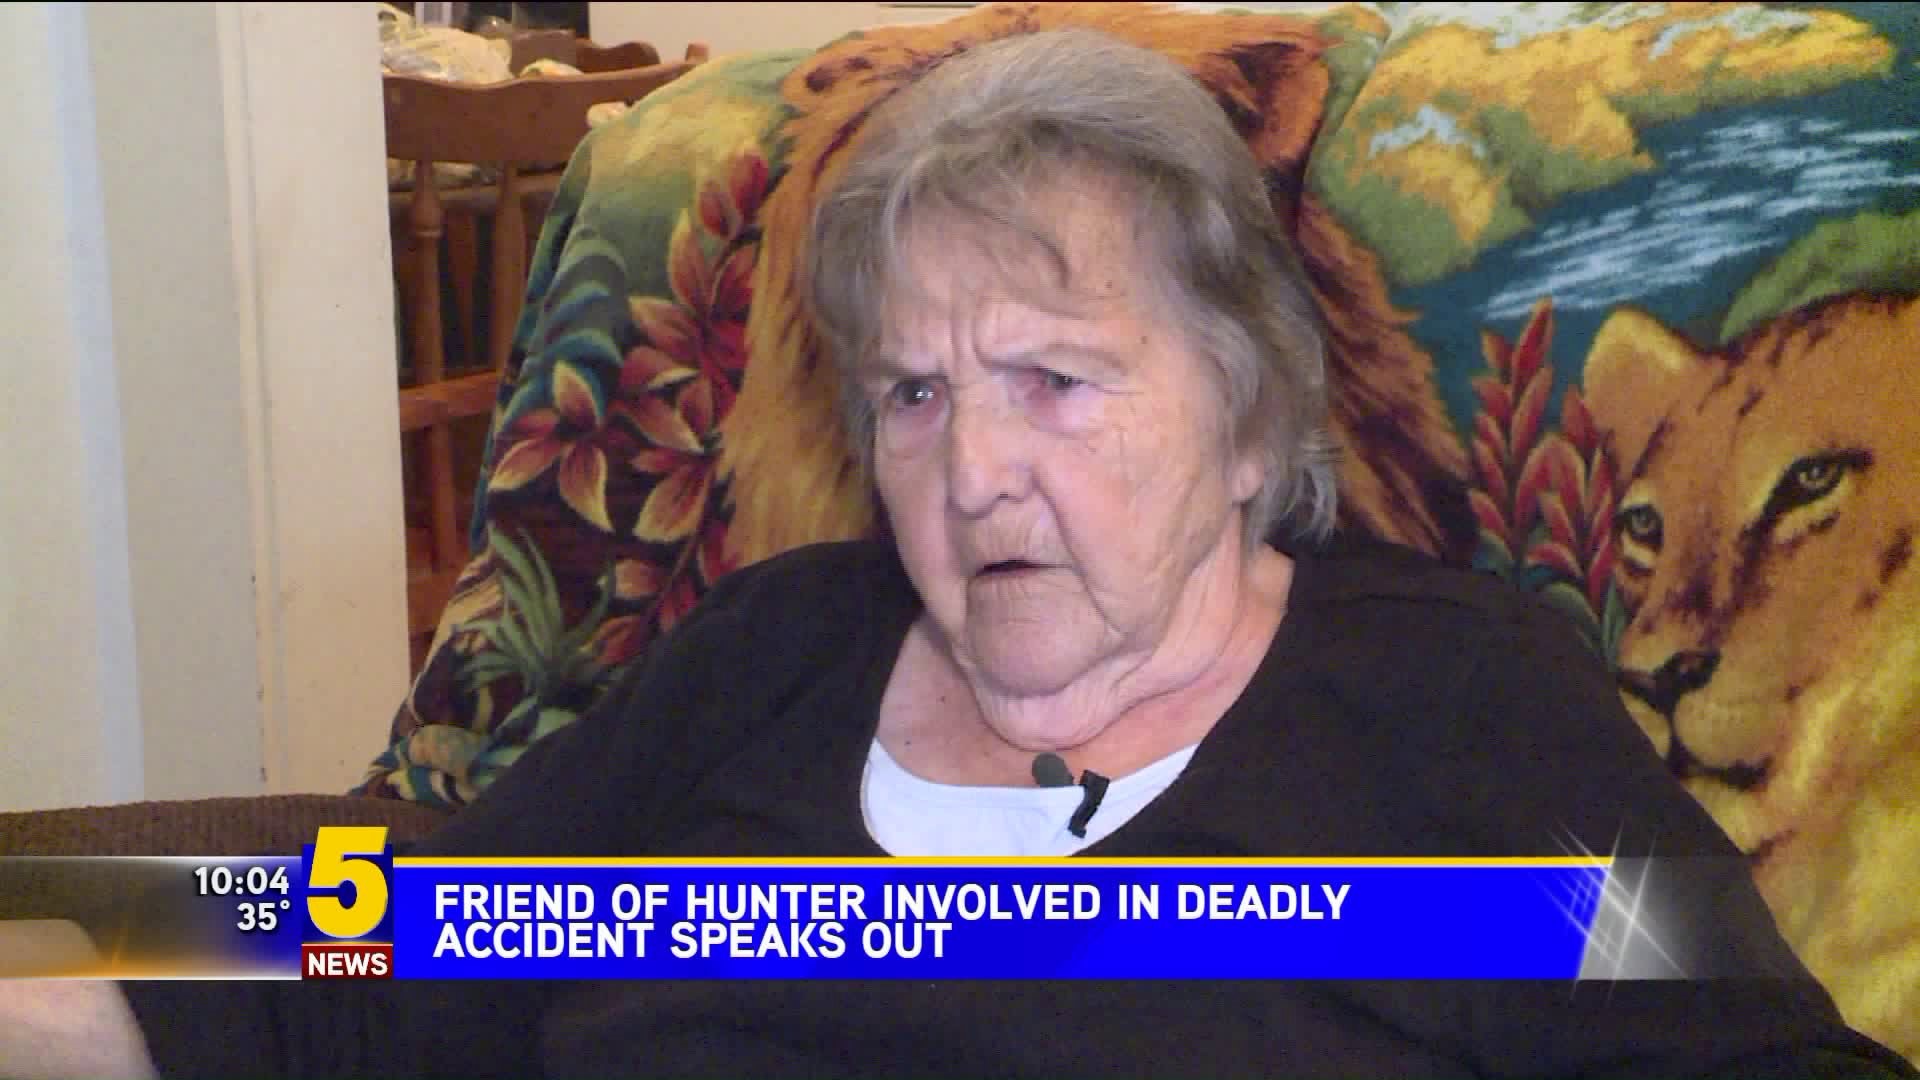 Friend Of Hunter Involved In Deadly Accident Speaks Out